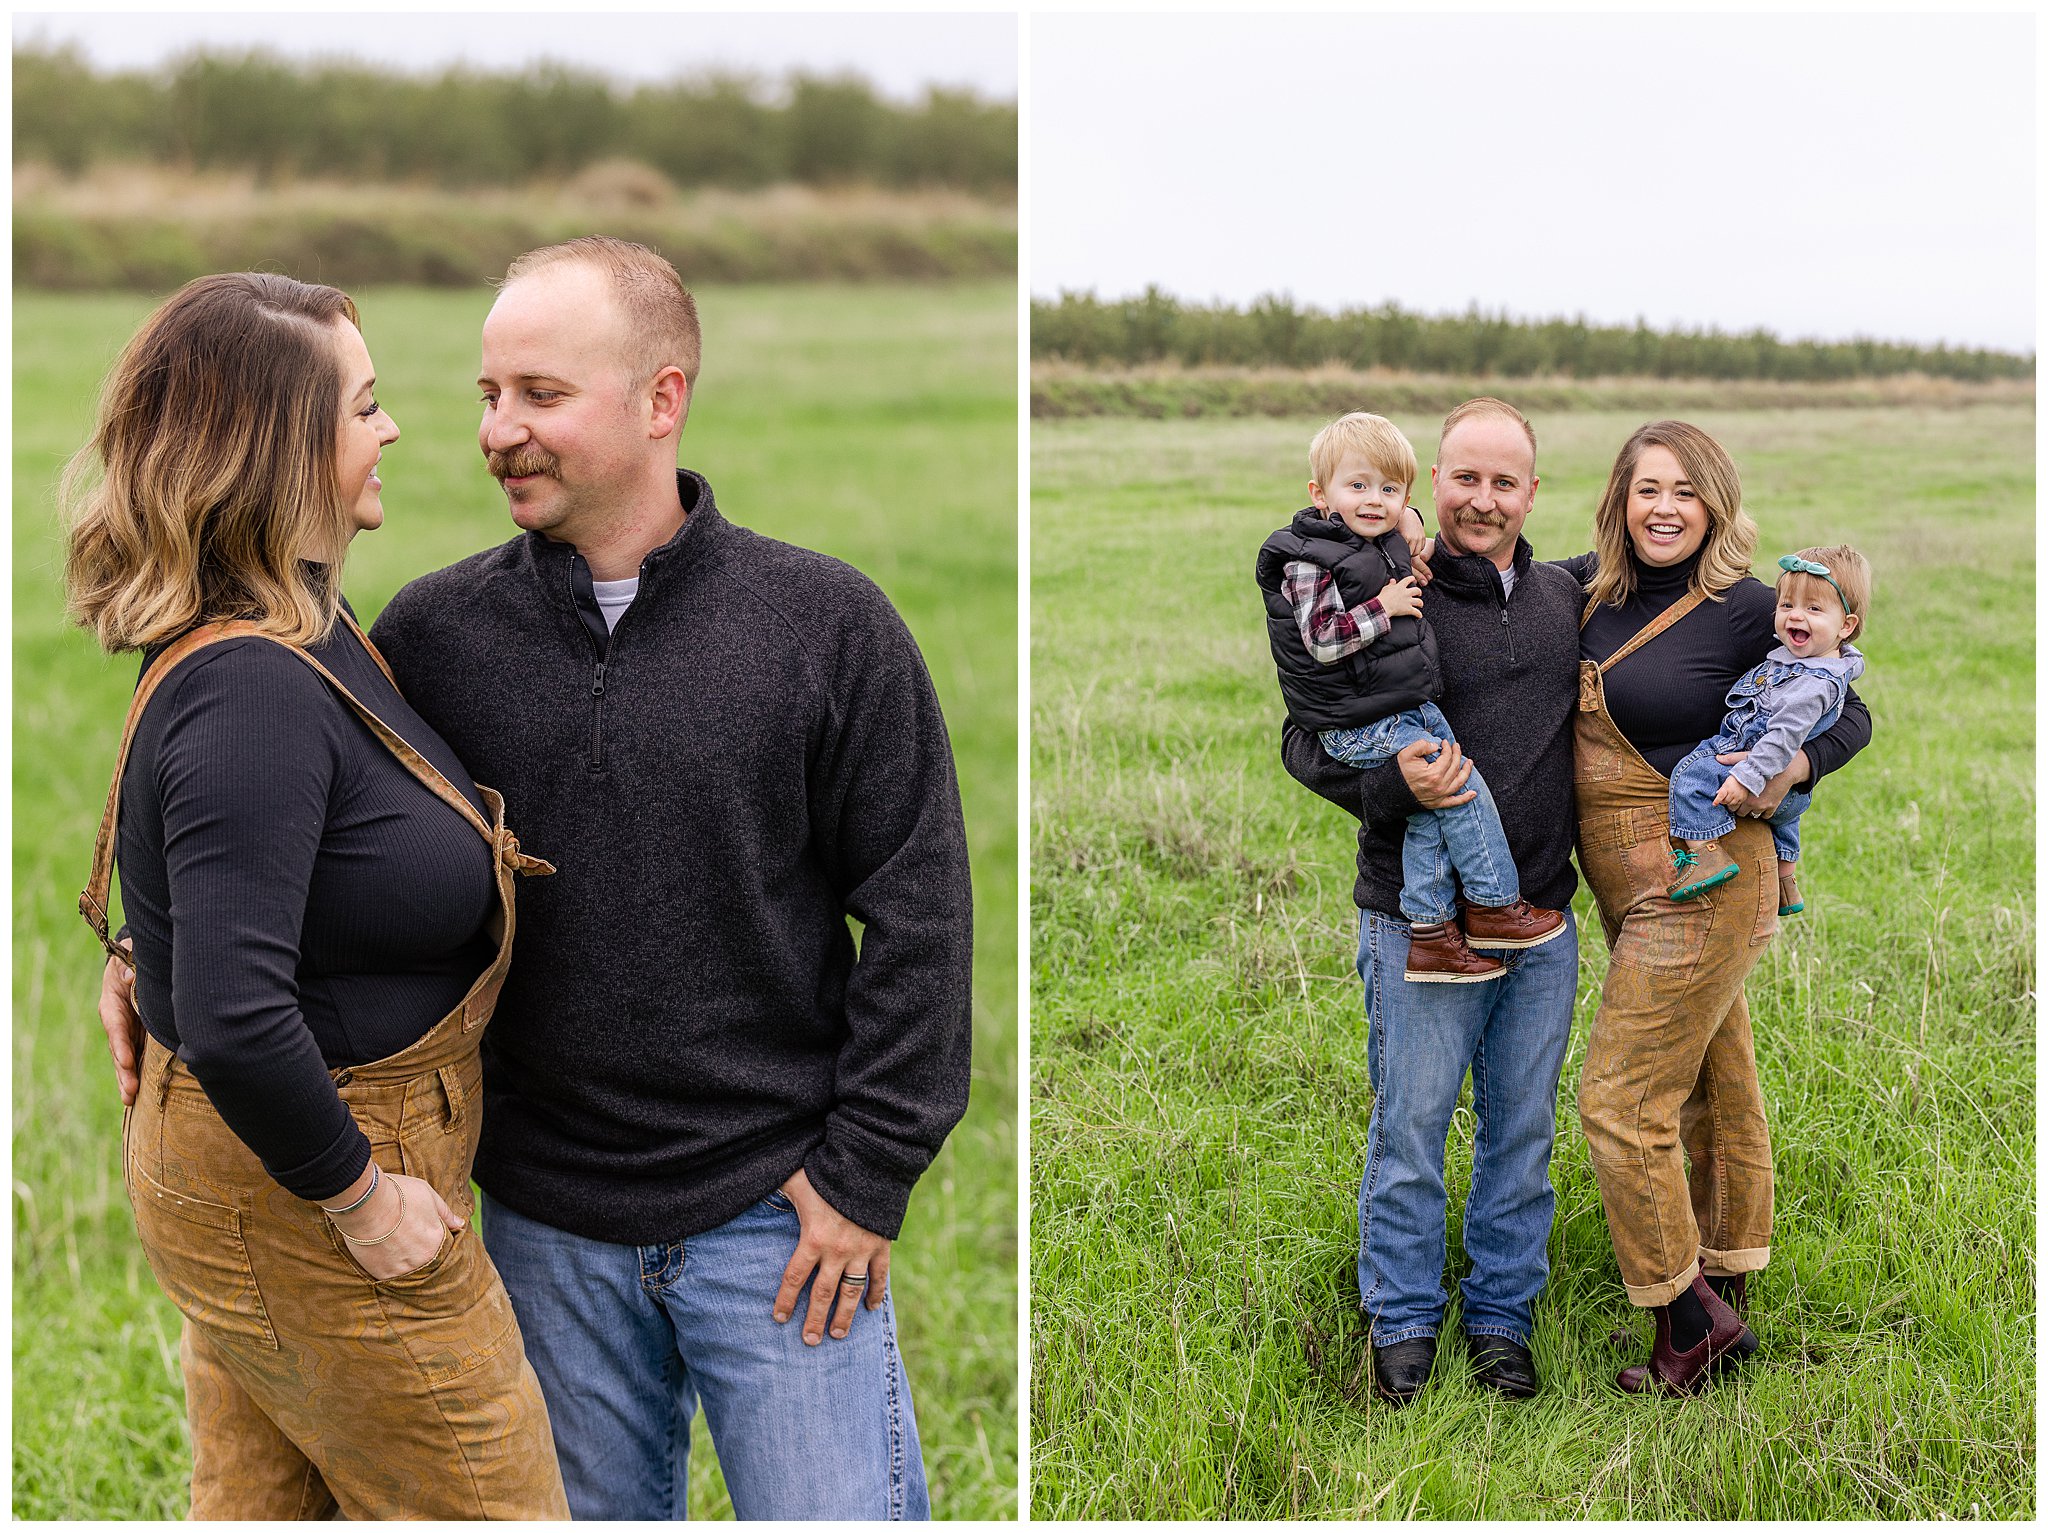 Family Session Private Residence Orland CA Grass Field Overalls,